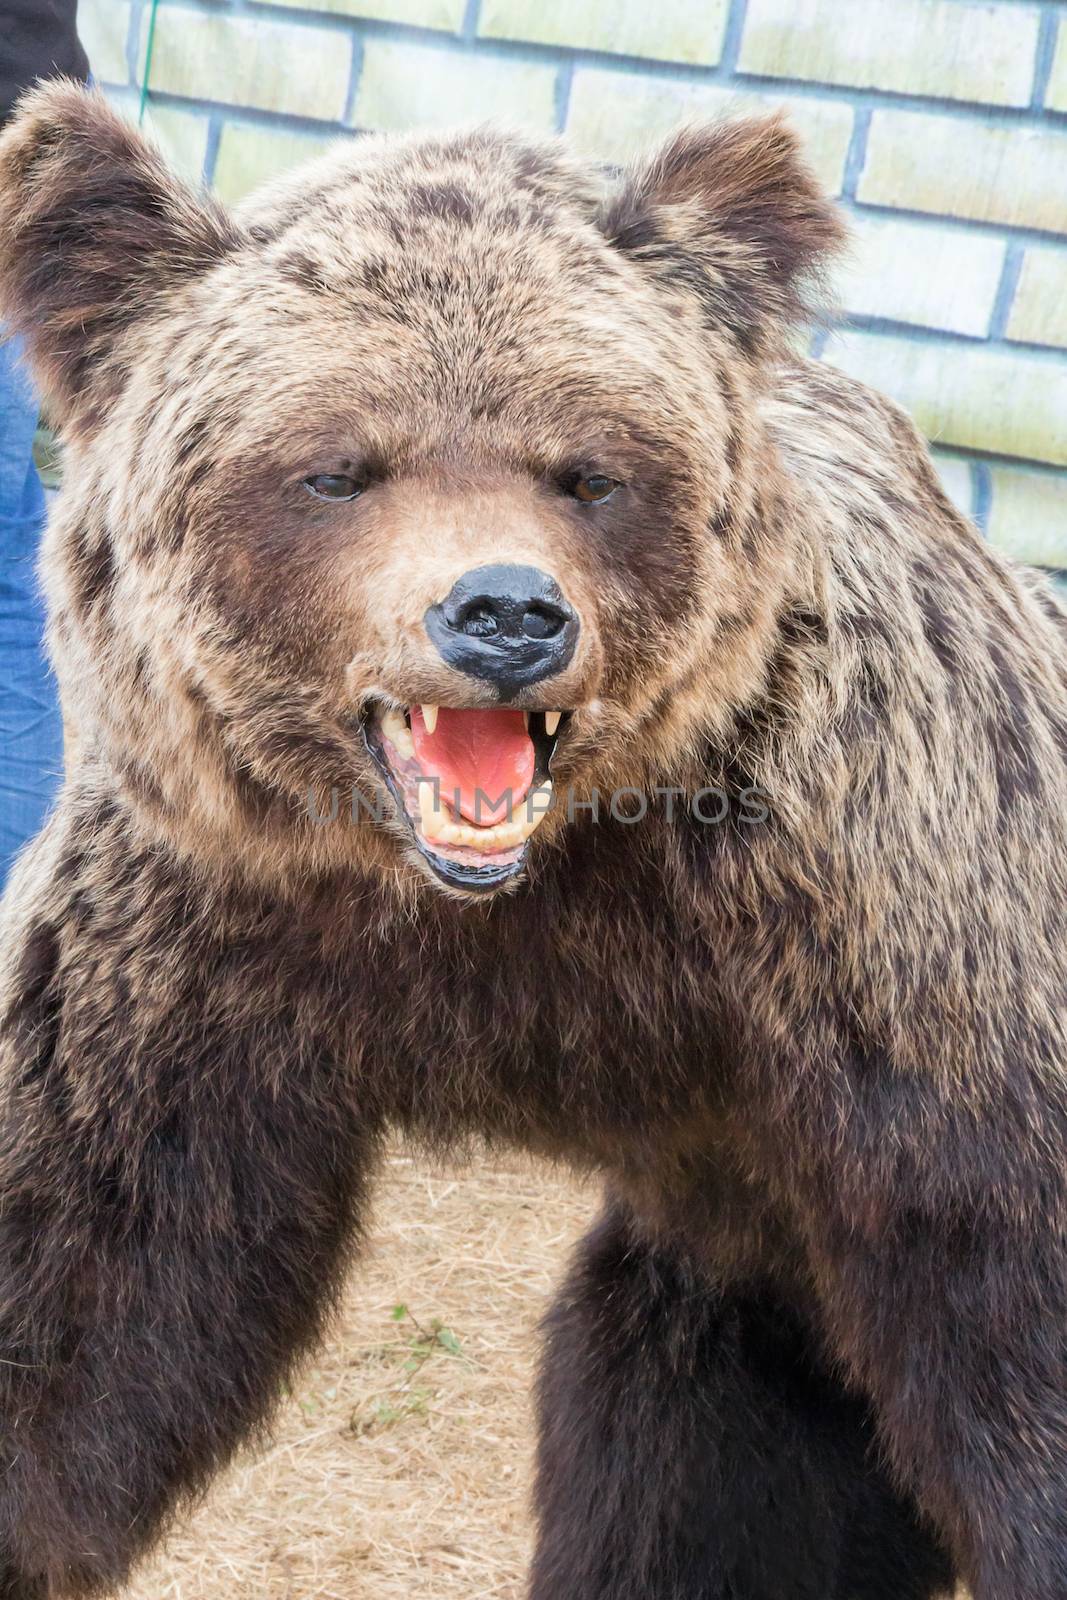 Effigy of a big brown bear with an open mouth. It is photographed by a close up.